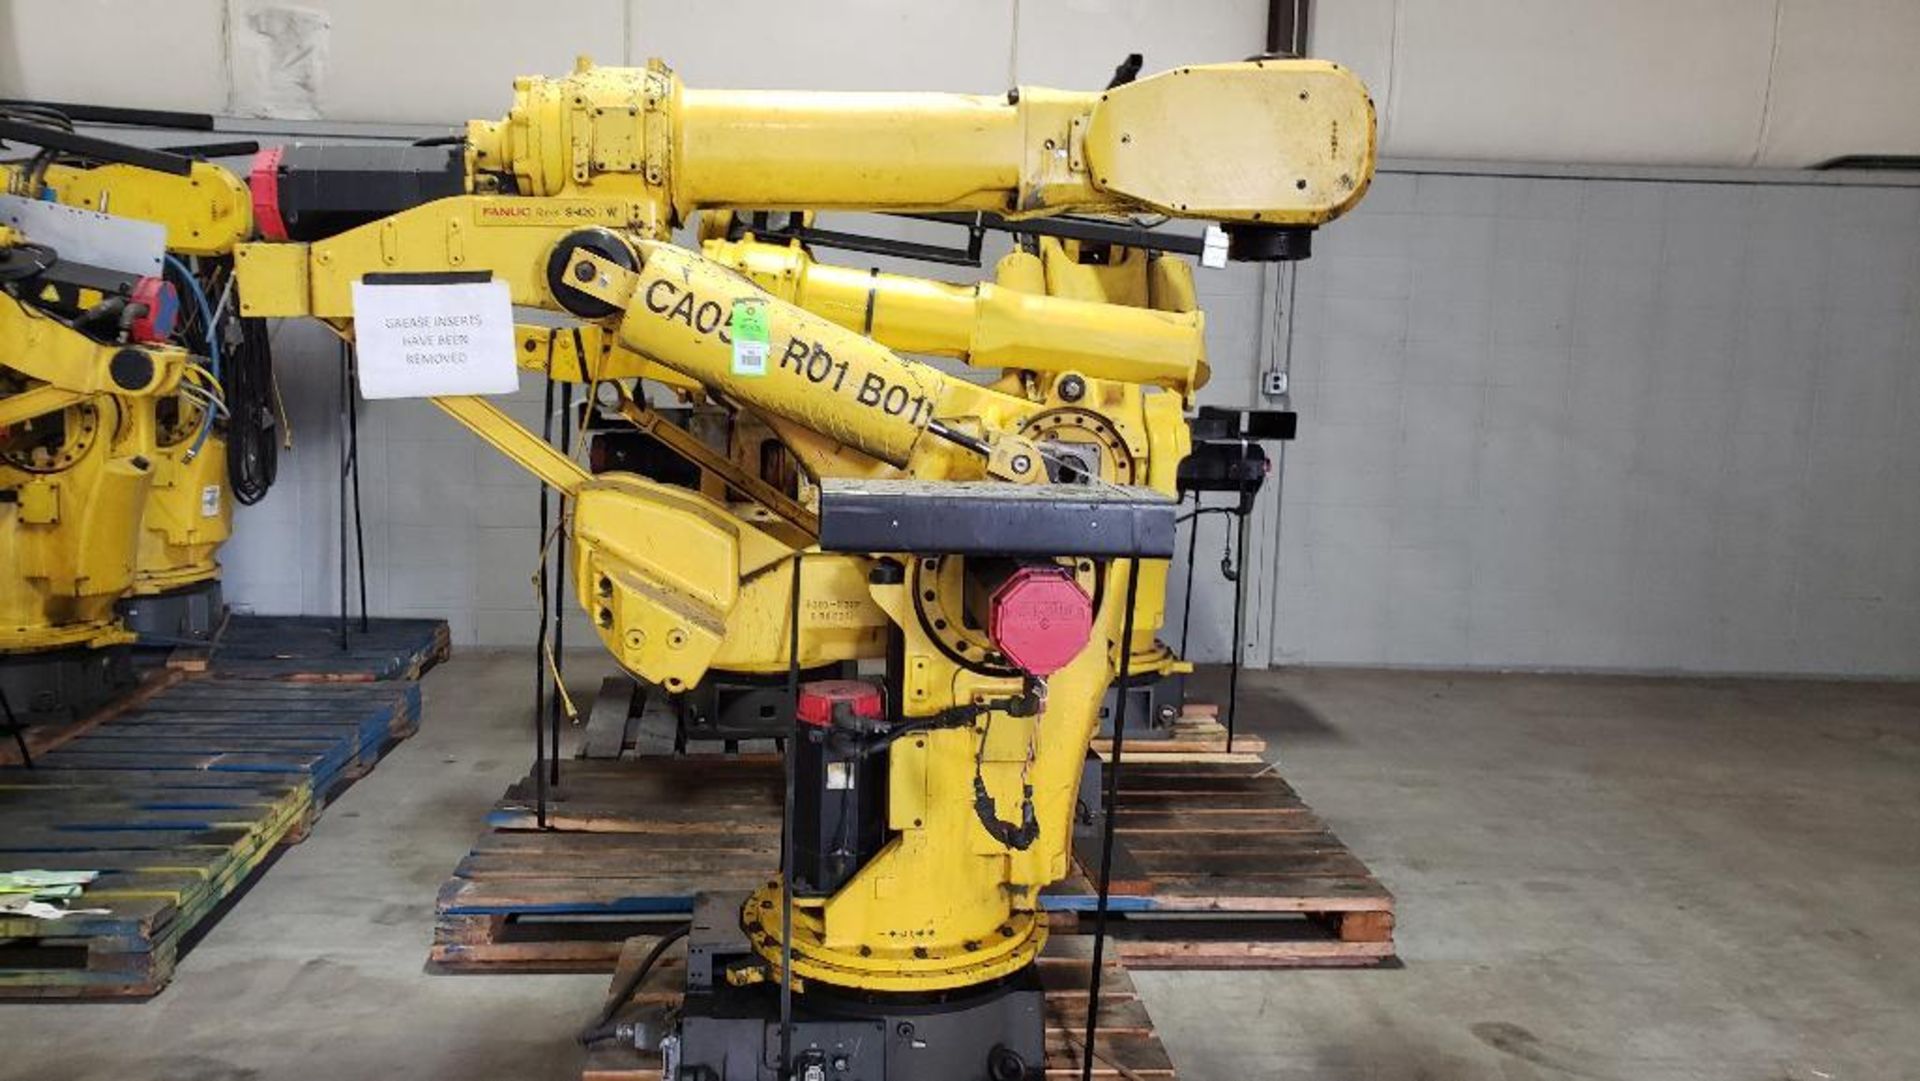 (Parts/Repairable) Fanuc S-420iW robot 6-axis arm.